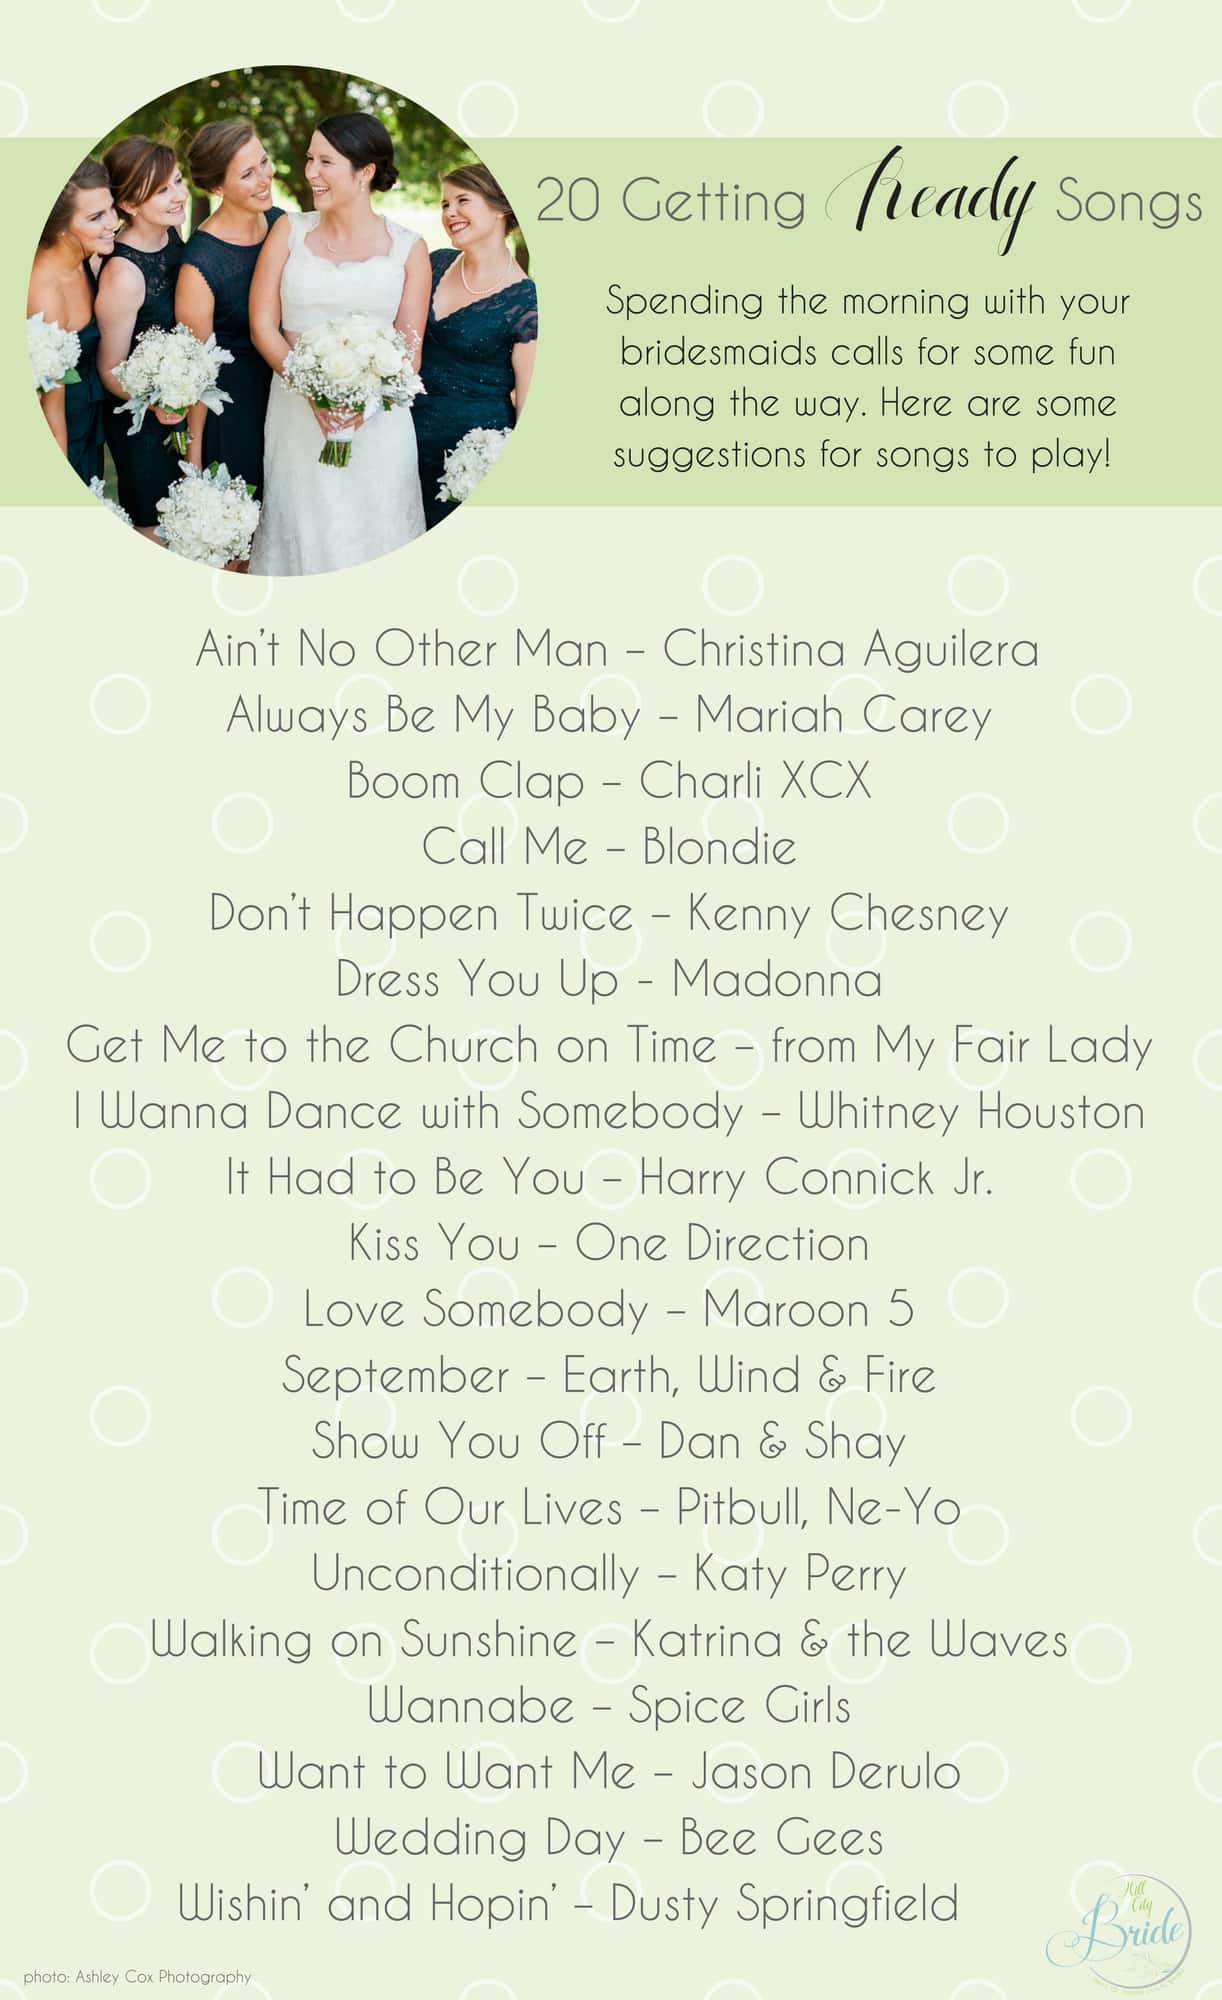 20 Getting Ready Songs for Your Wedding Day as seen on Hill City Bride Wedding Blog